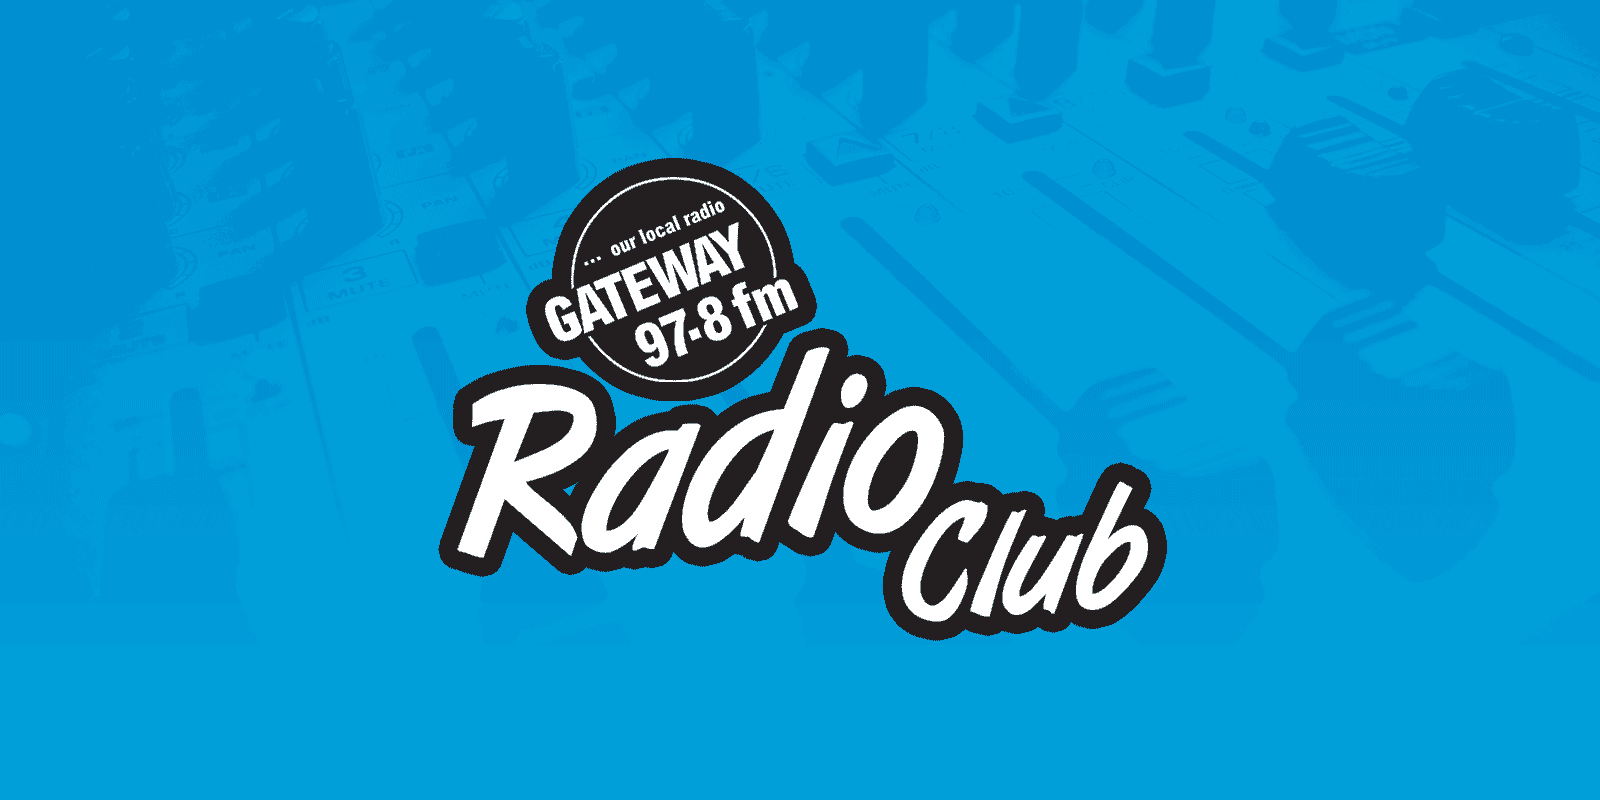 Featured image for “The Radio Club Takeover With Xanthe”